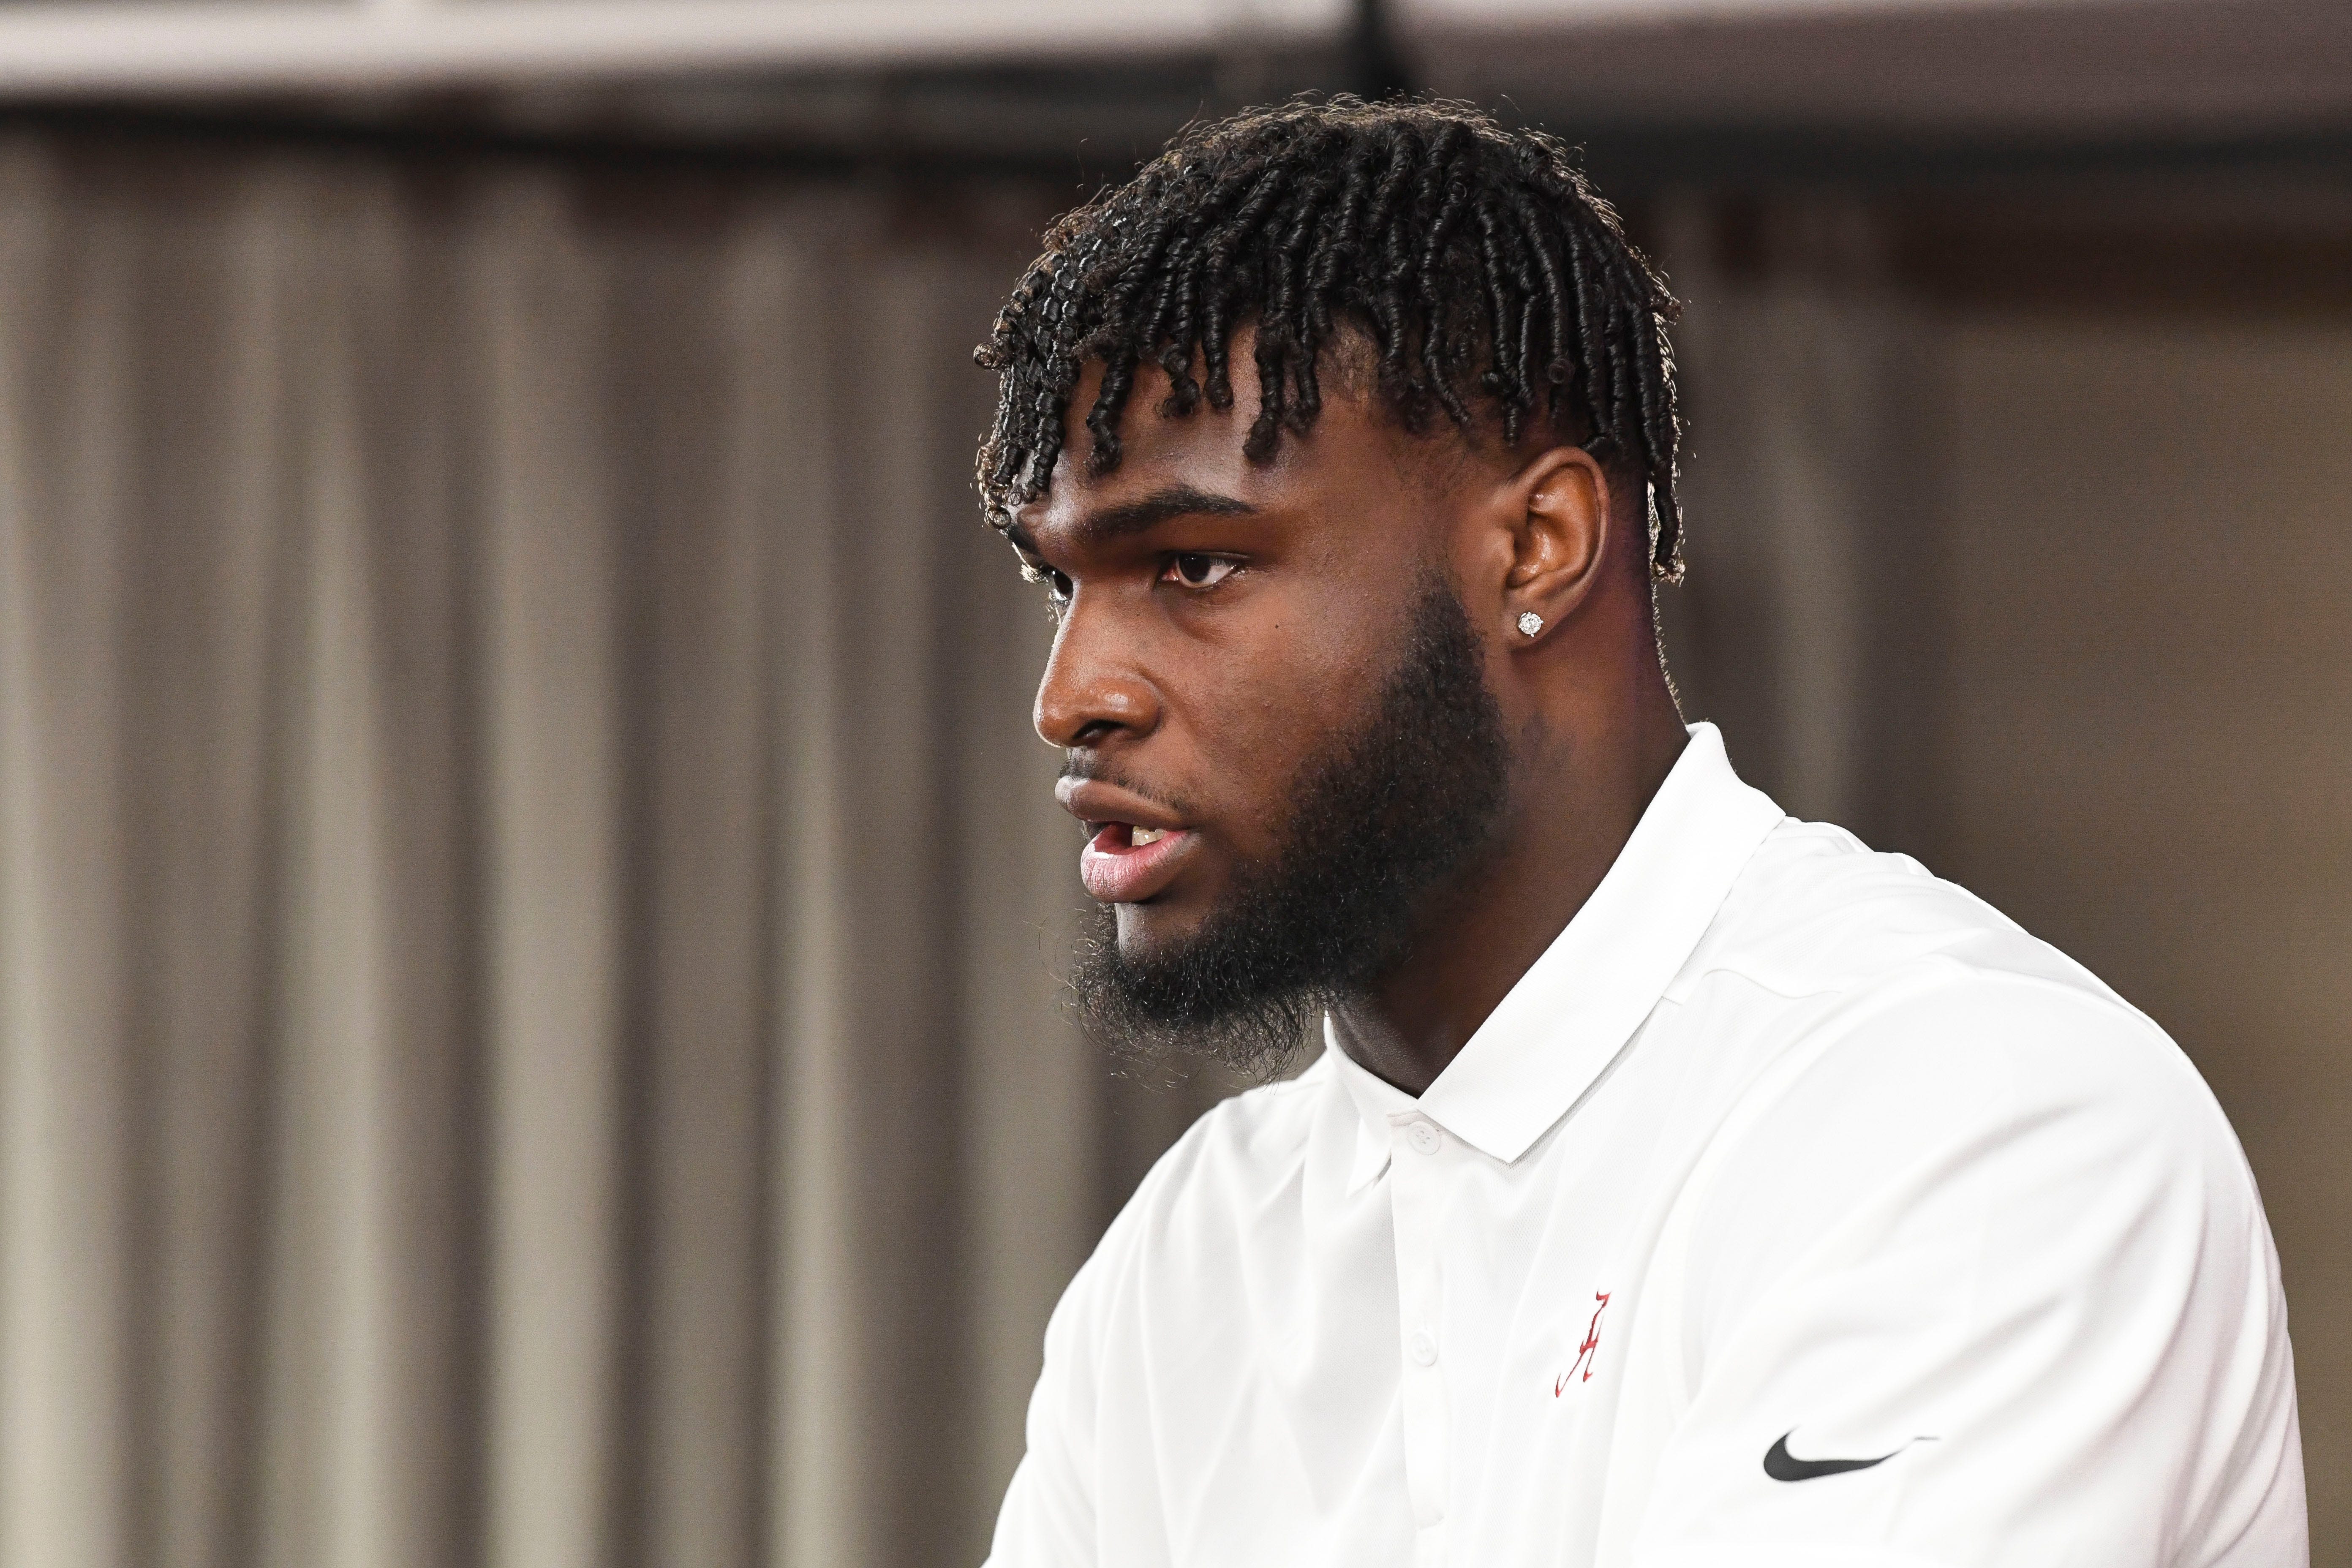 How Jaheim Oatis lost about 100 pounds since joining Alabama football